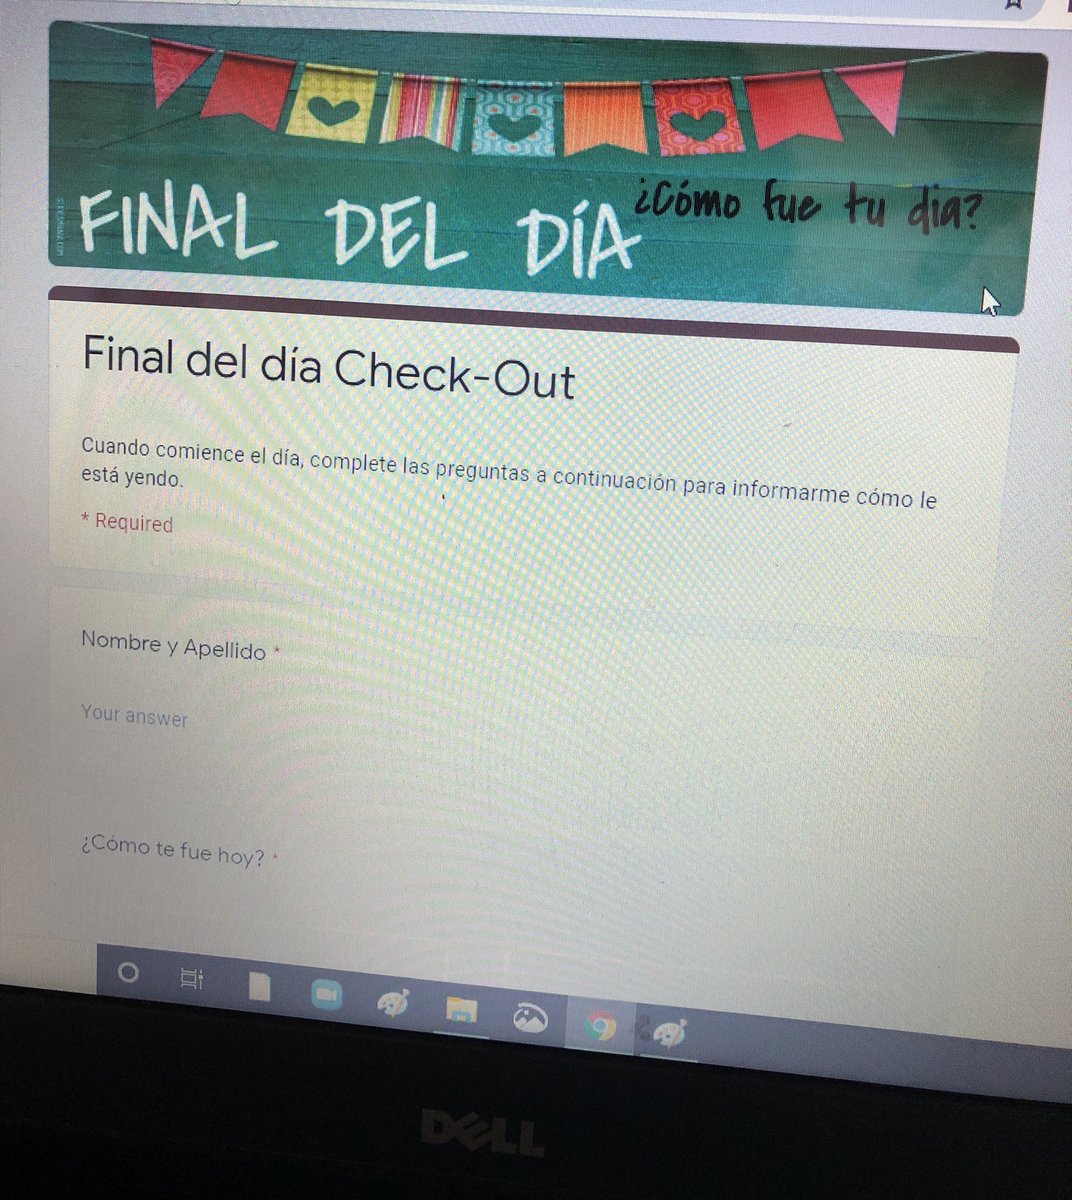 Check in and check out  google forms ready for summer school. They are very kid friendly. Bitmoji addicted. #constantlearning @FelyTeachnology @pily579 @Bitmoji @CGarza0930 @itexaseducator